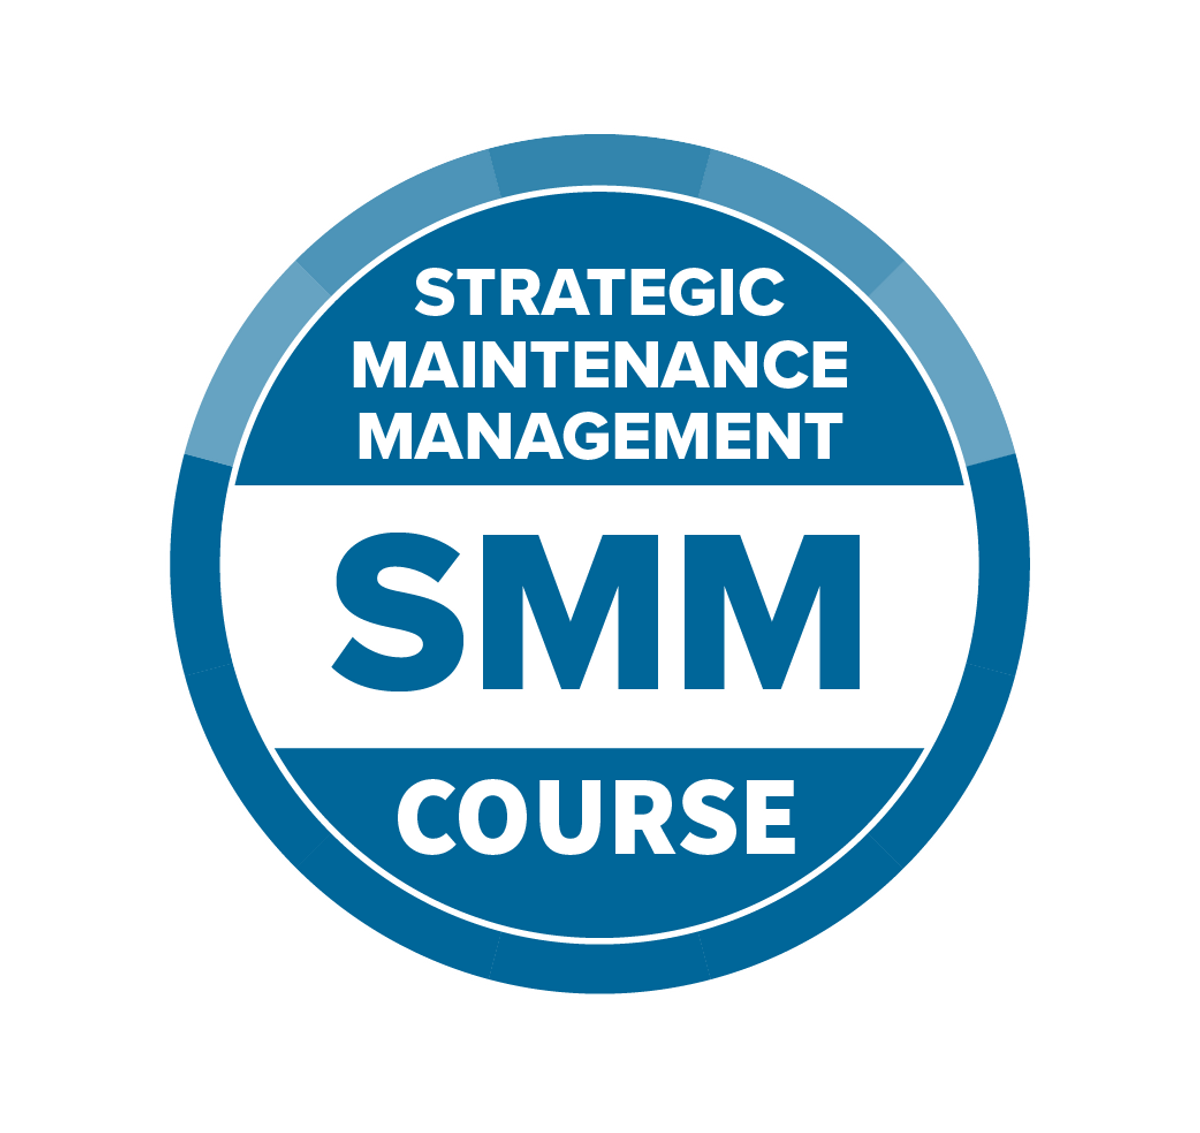 Strategic Maintenance Management Course (formerly CMM) Co-located at MaximoWorld